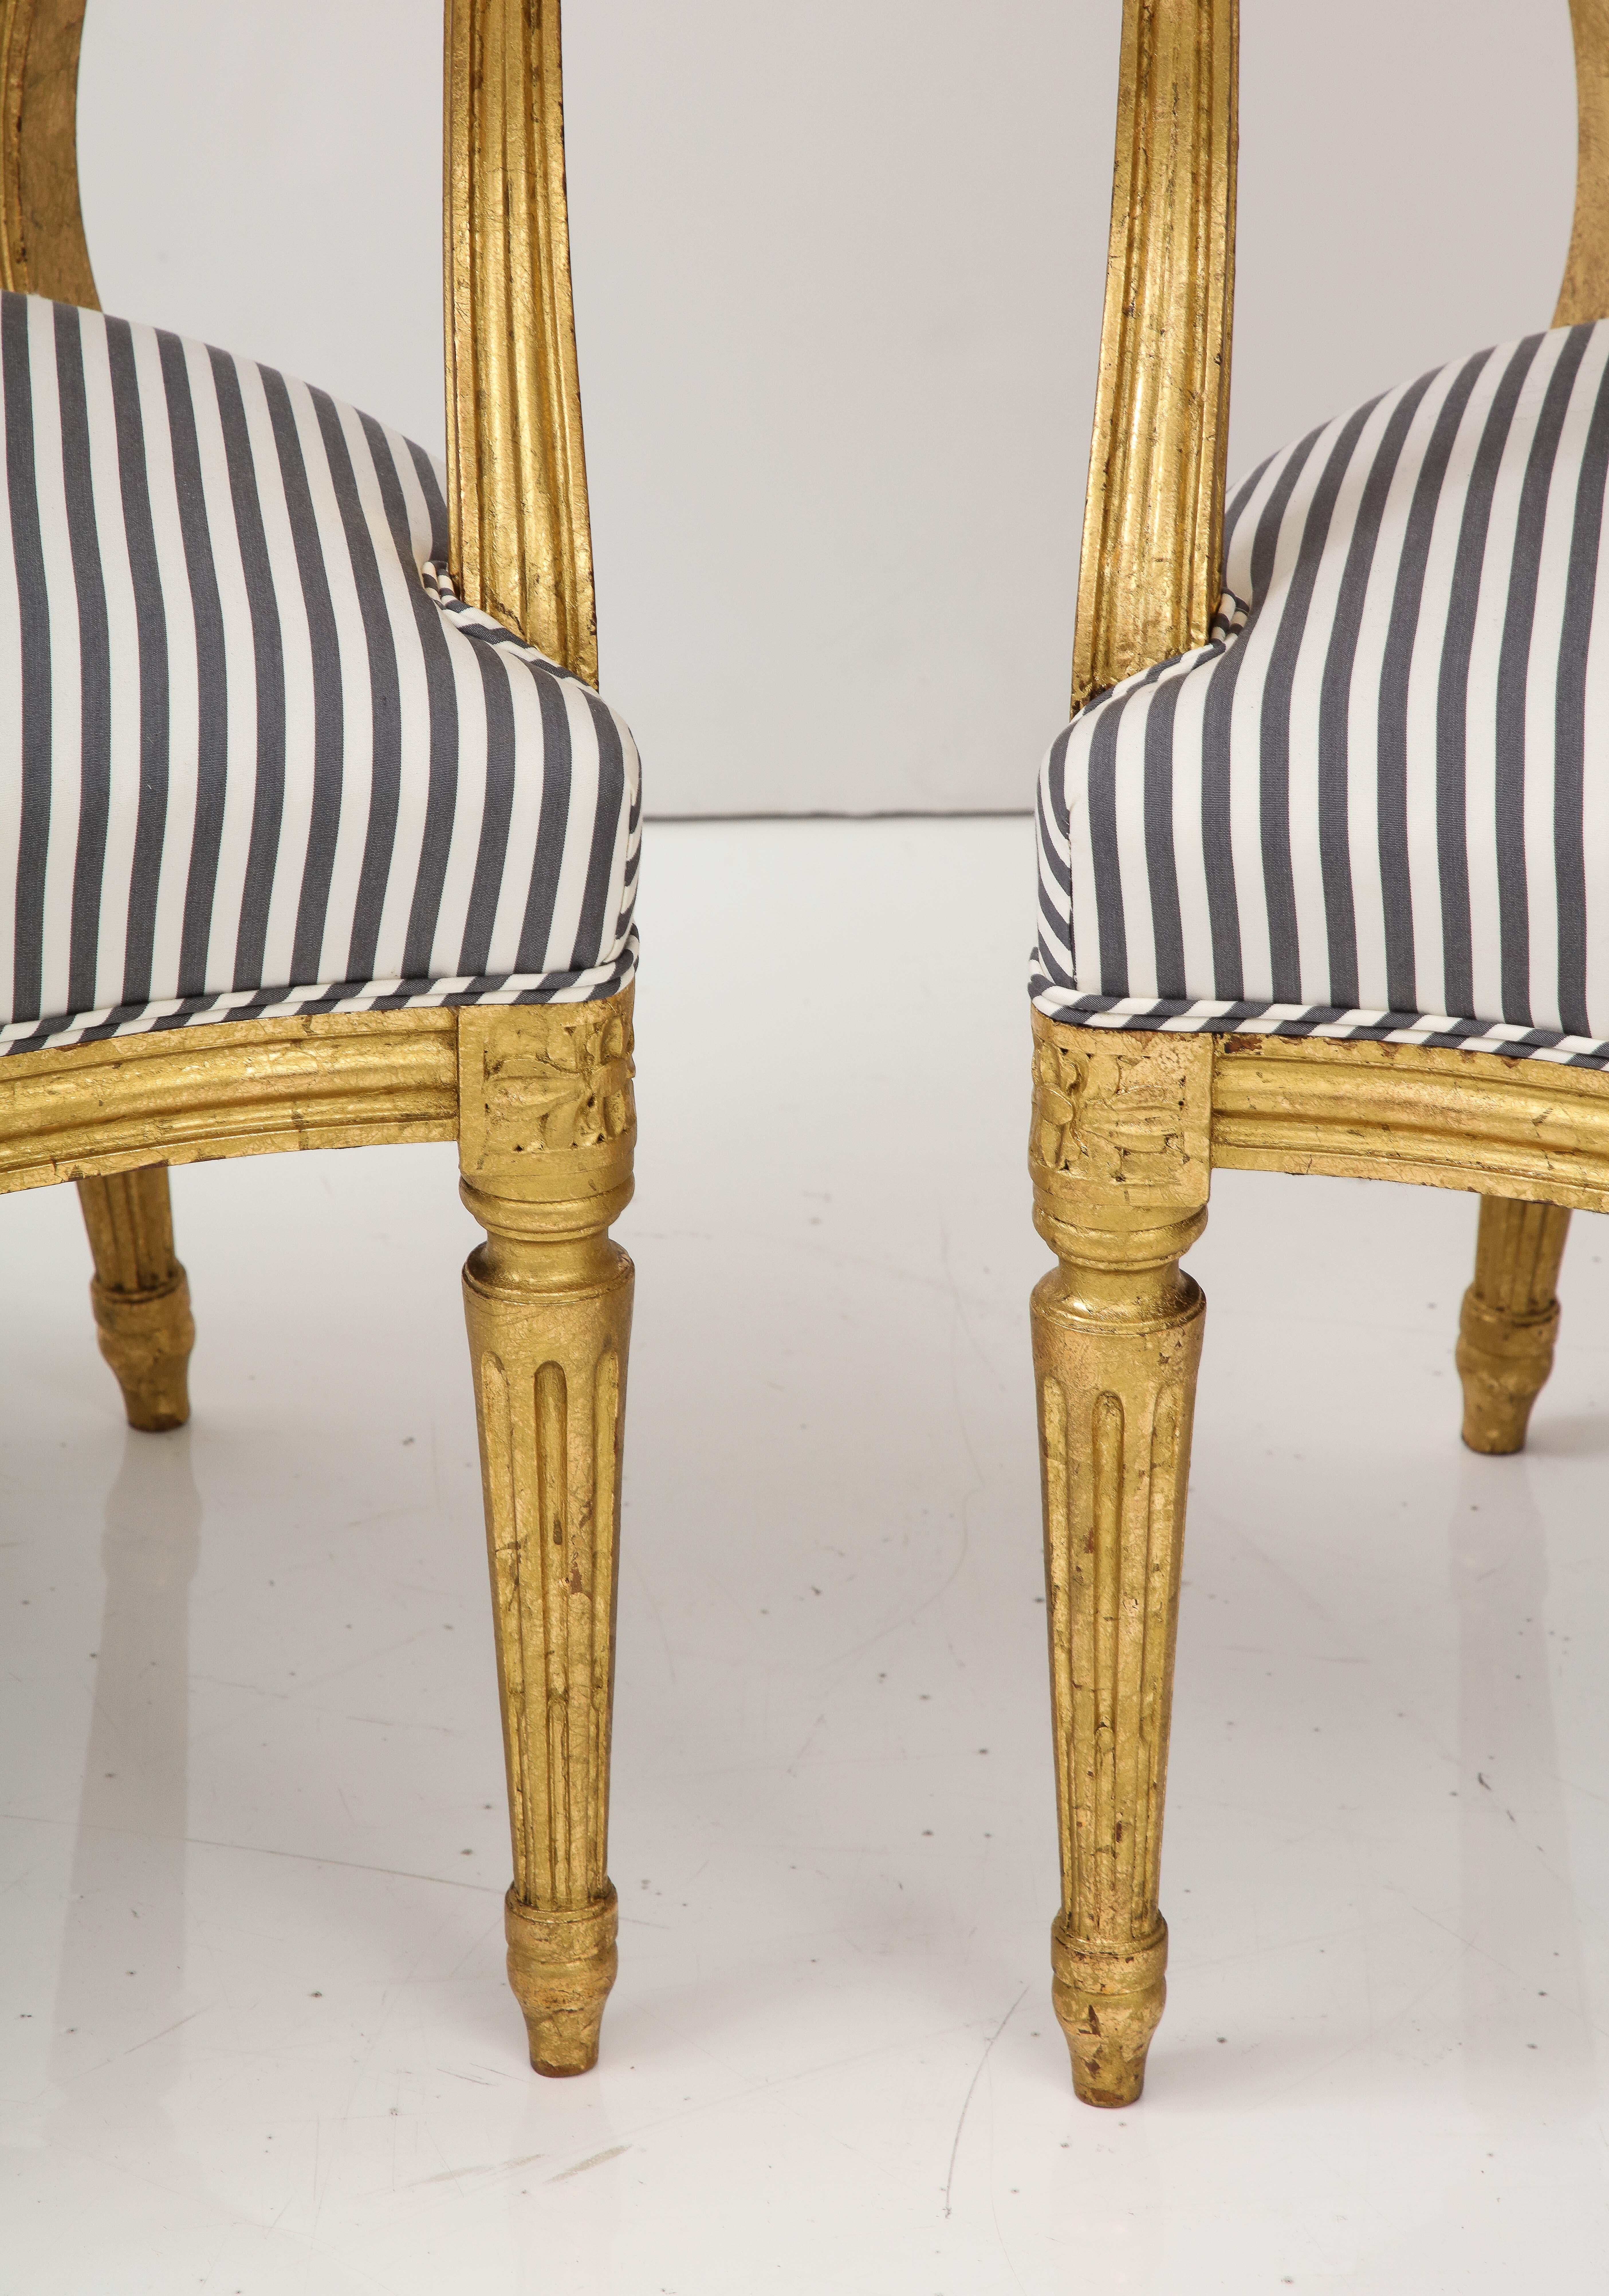 Old meets new in this chic pair of Louis XVI style arm chairs in a gilt finish.. We love the restrained elegance of the Louis XVI style, and these chairs feature many of the details characteristic of the style--oval back, lovely carved detail at the